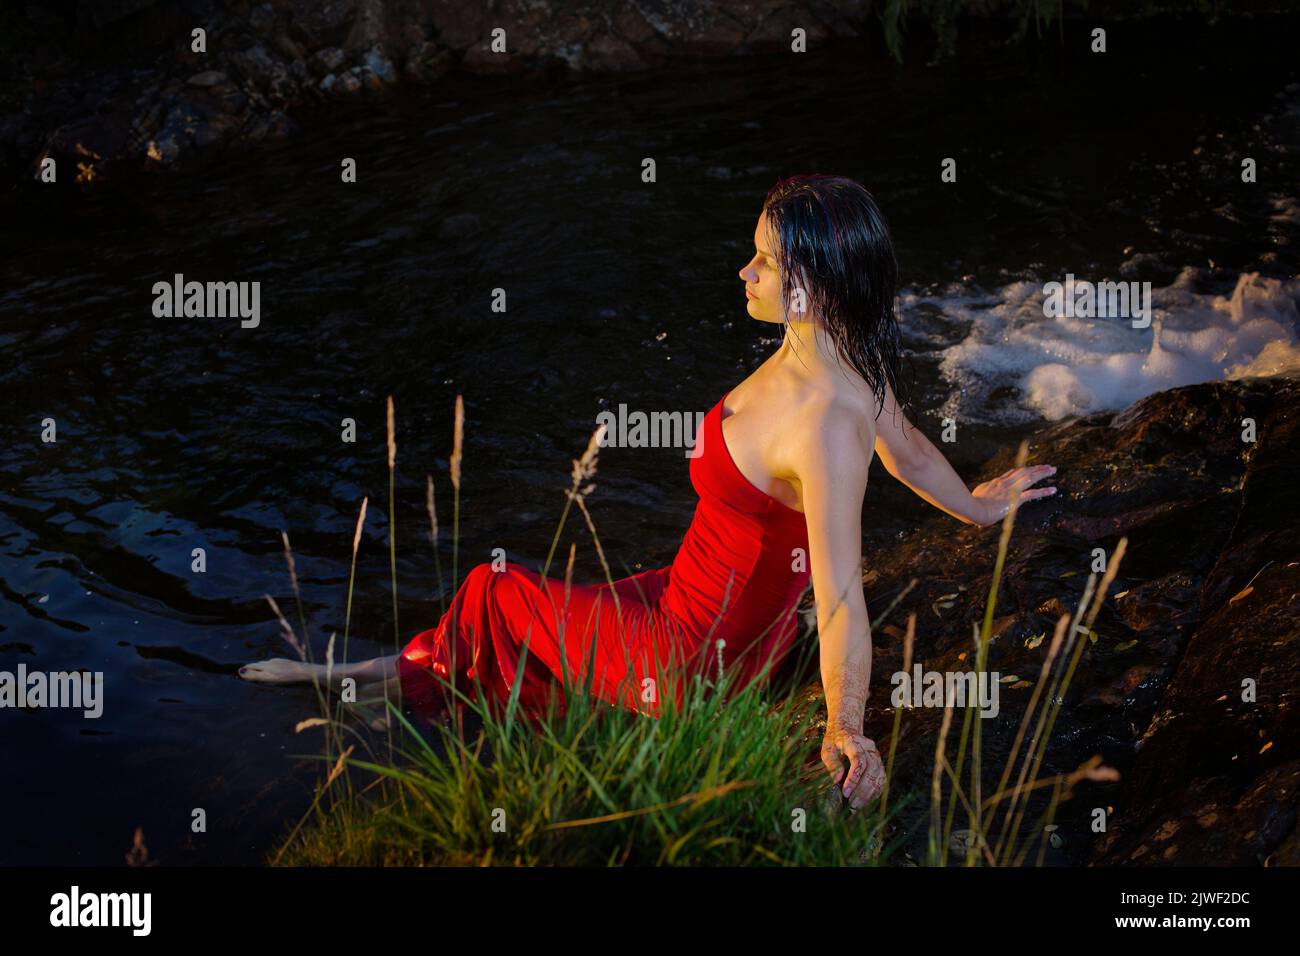 A beautiful young woman with a red dress cooling off in a river Stock Photo